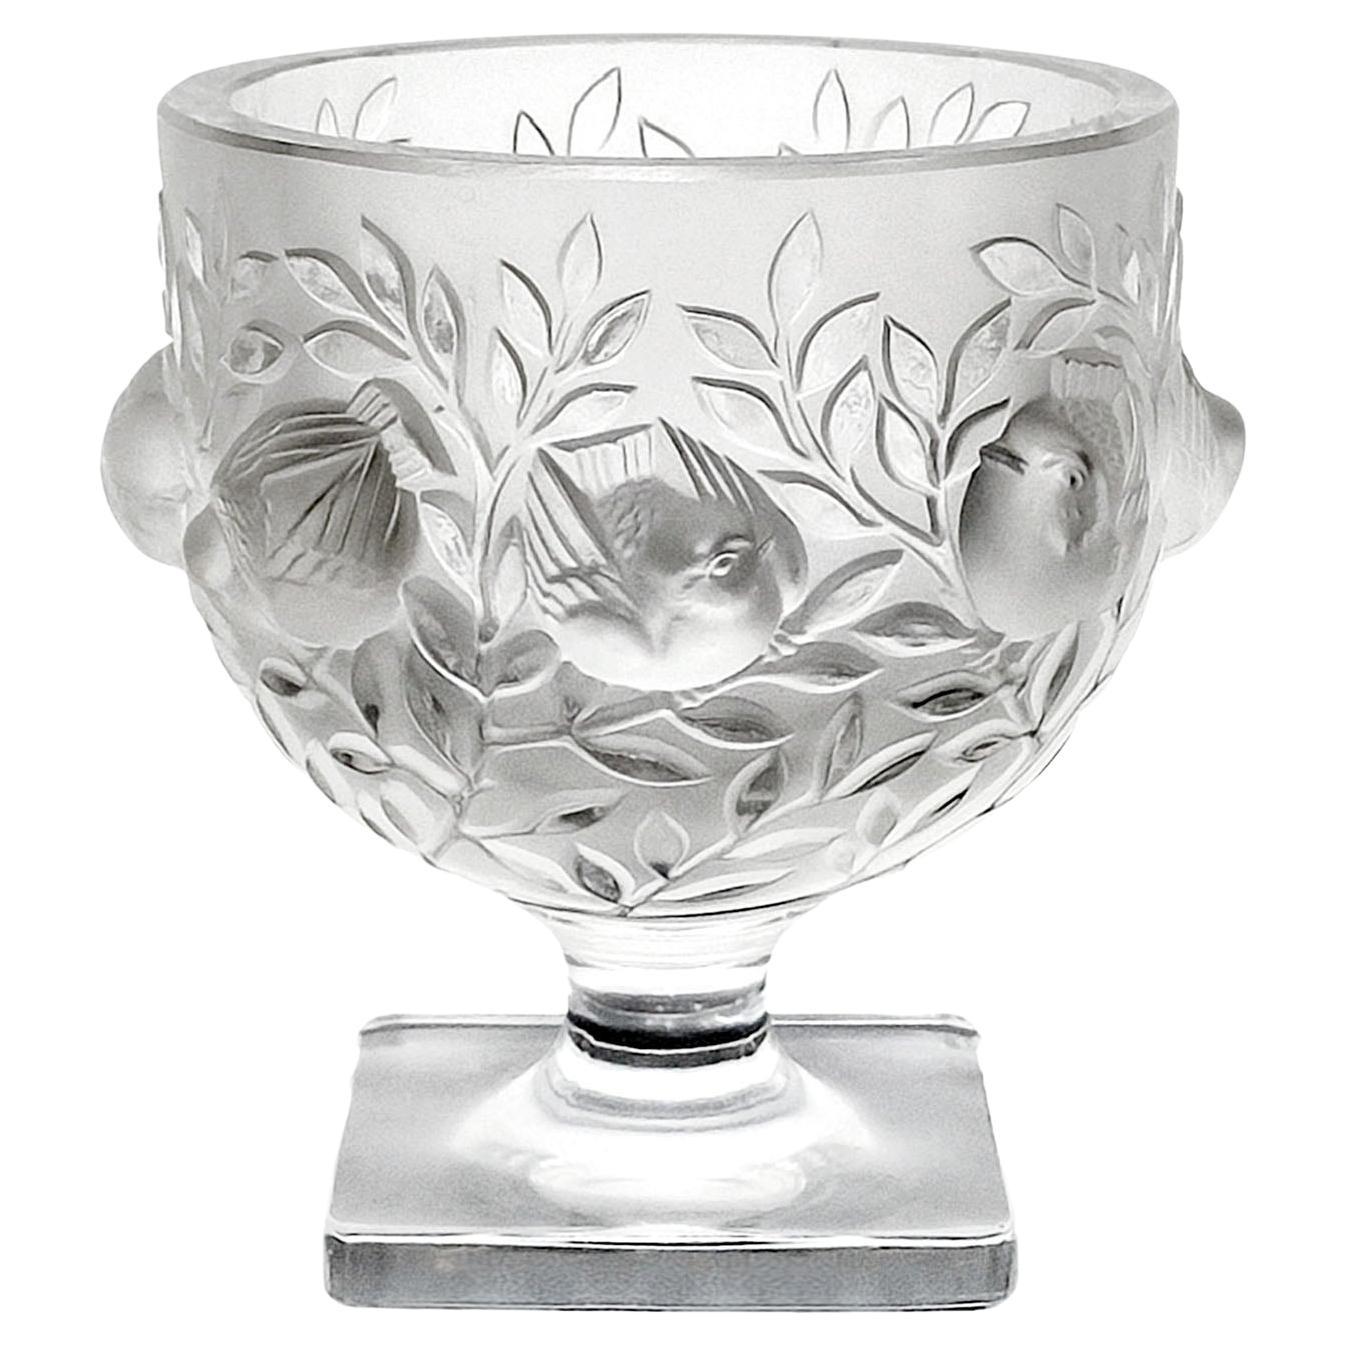 Lalique Crystal Vase 'Elisabeth' Décor of  Birds and Branches - FREE SHIPPING For Sale